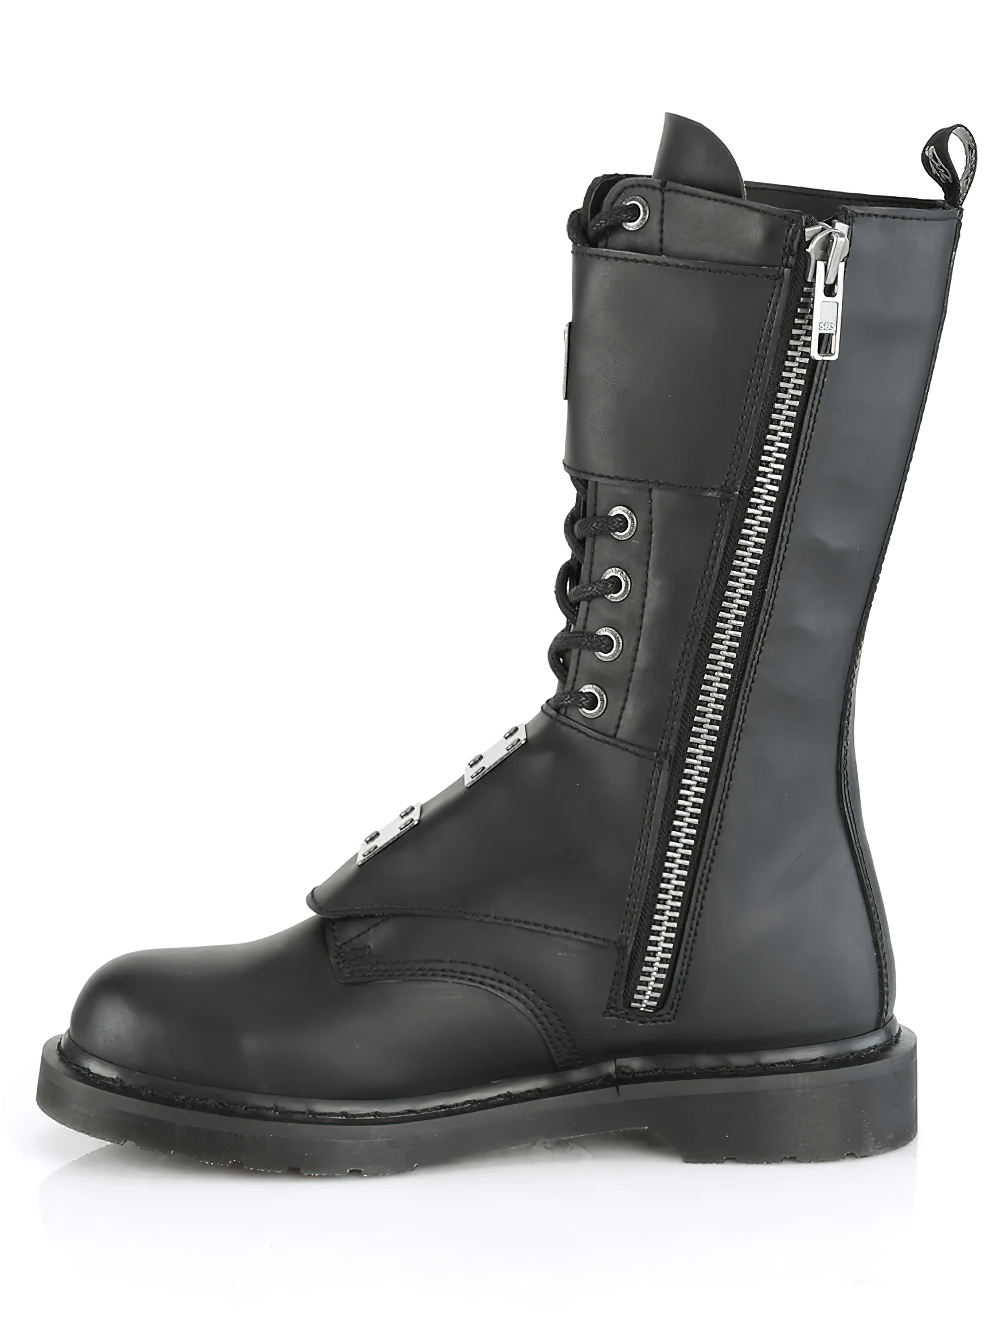 DEMONIA Black Mid-Calf Combat Boots with Metal Plate Detail